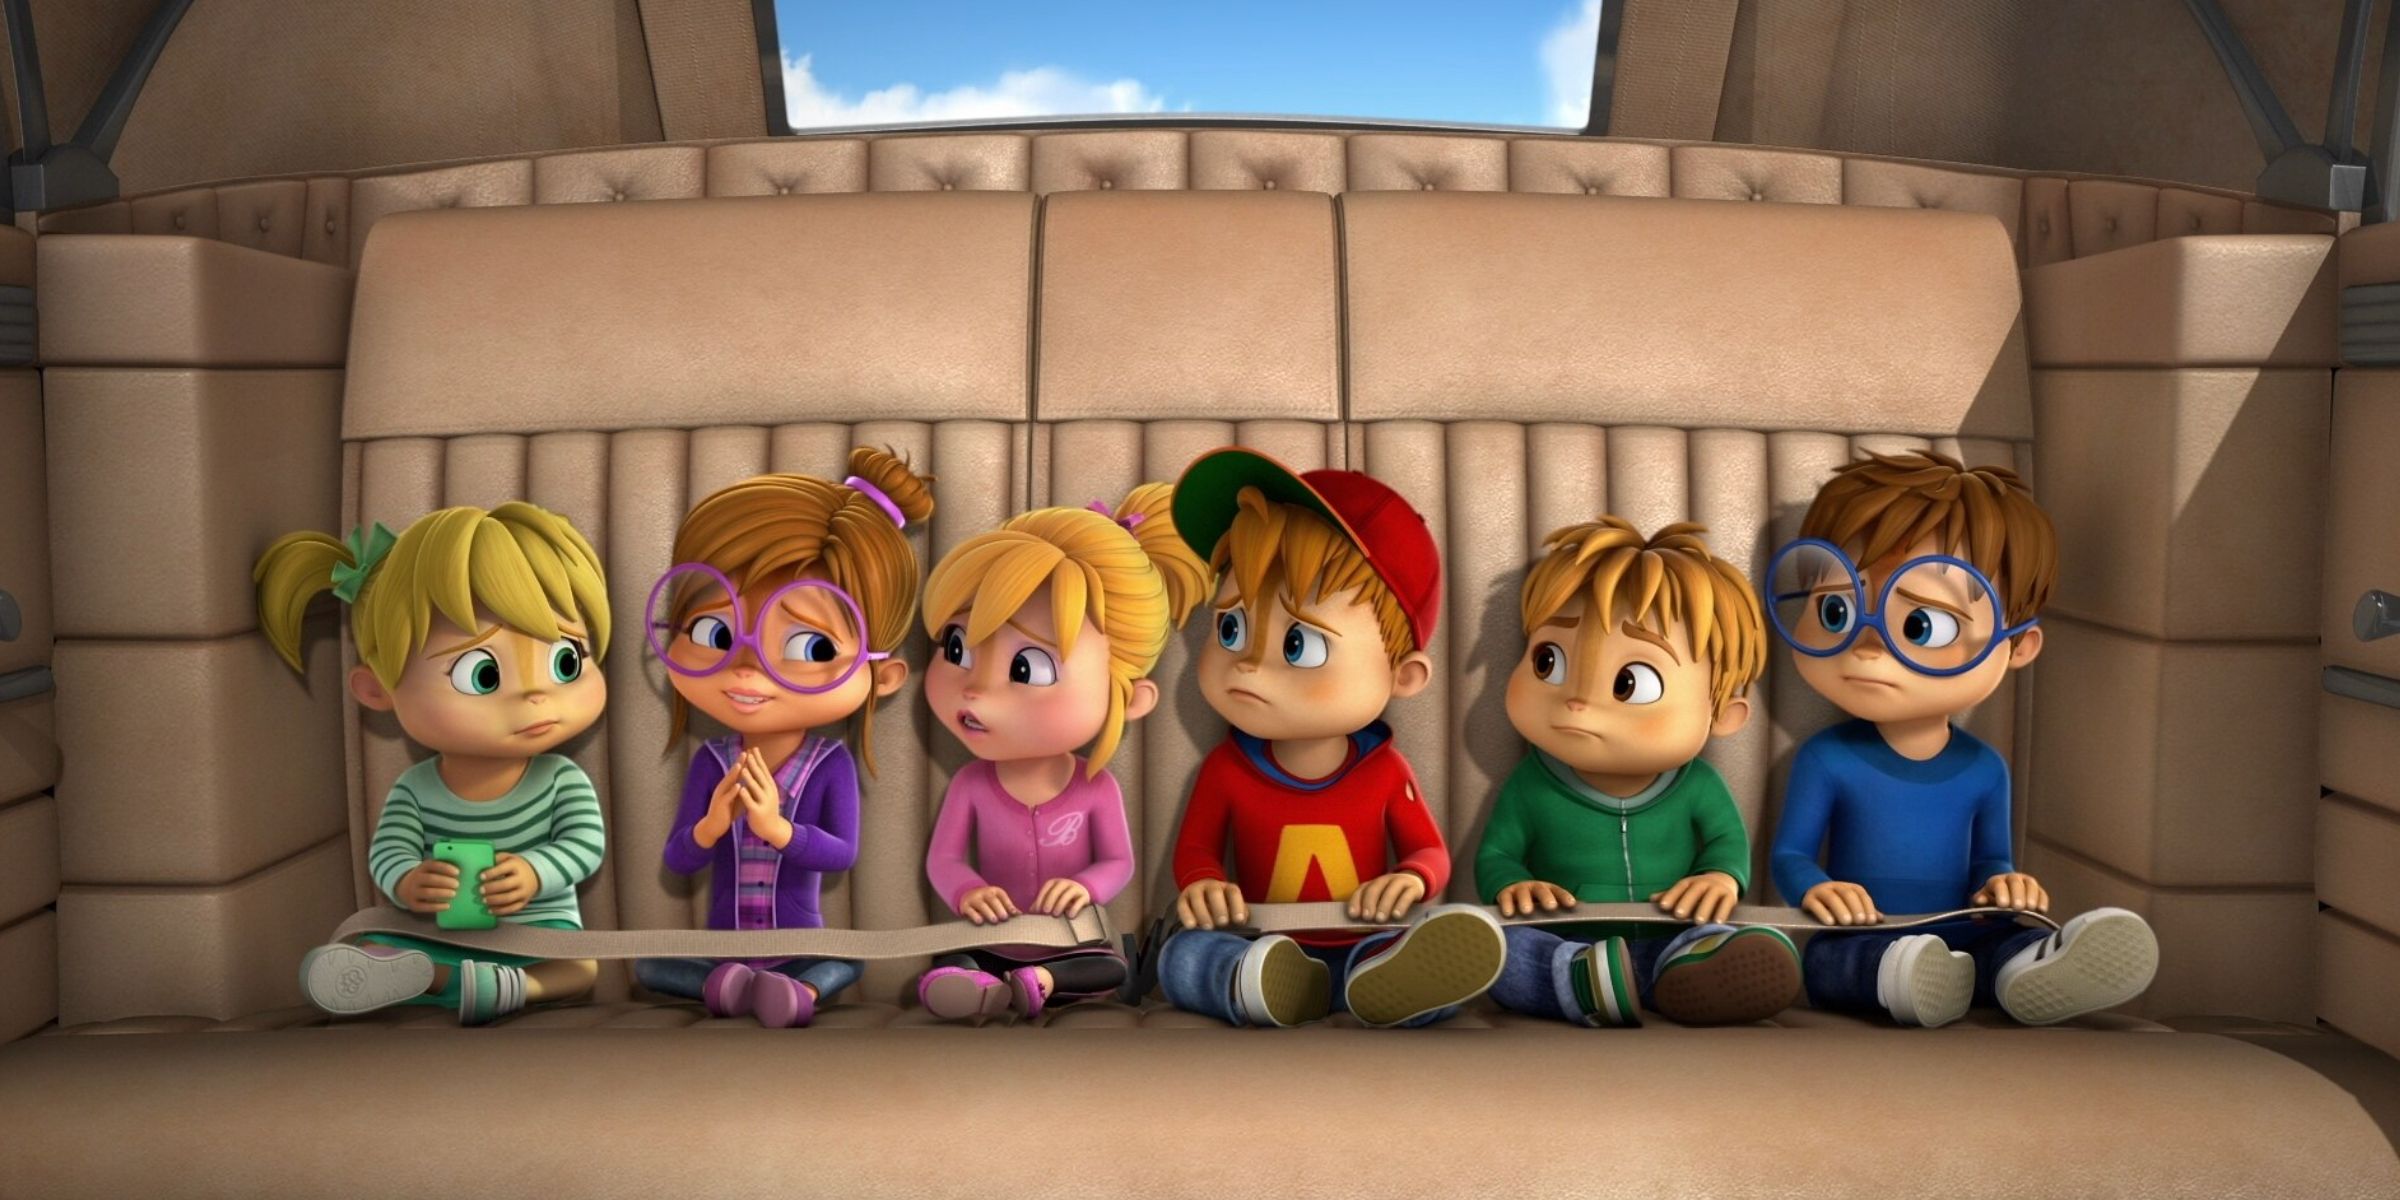 All of the Chippettes and Chipmunks buckled into one big seat in a car in Alvinnn and the Chipmunks